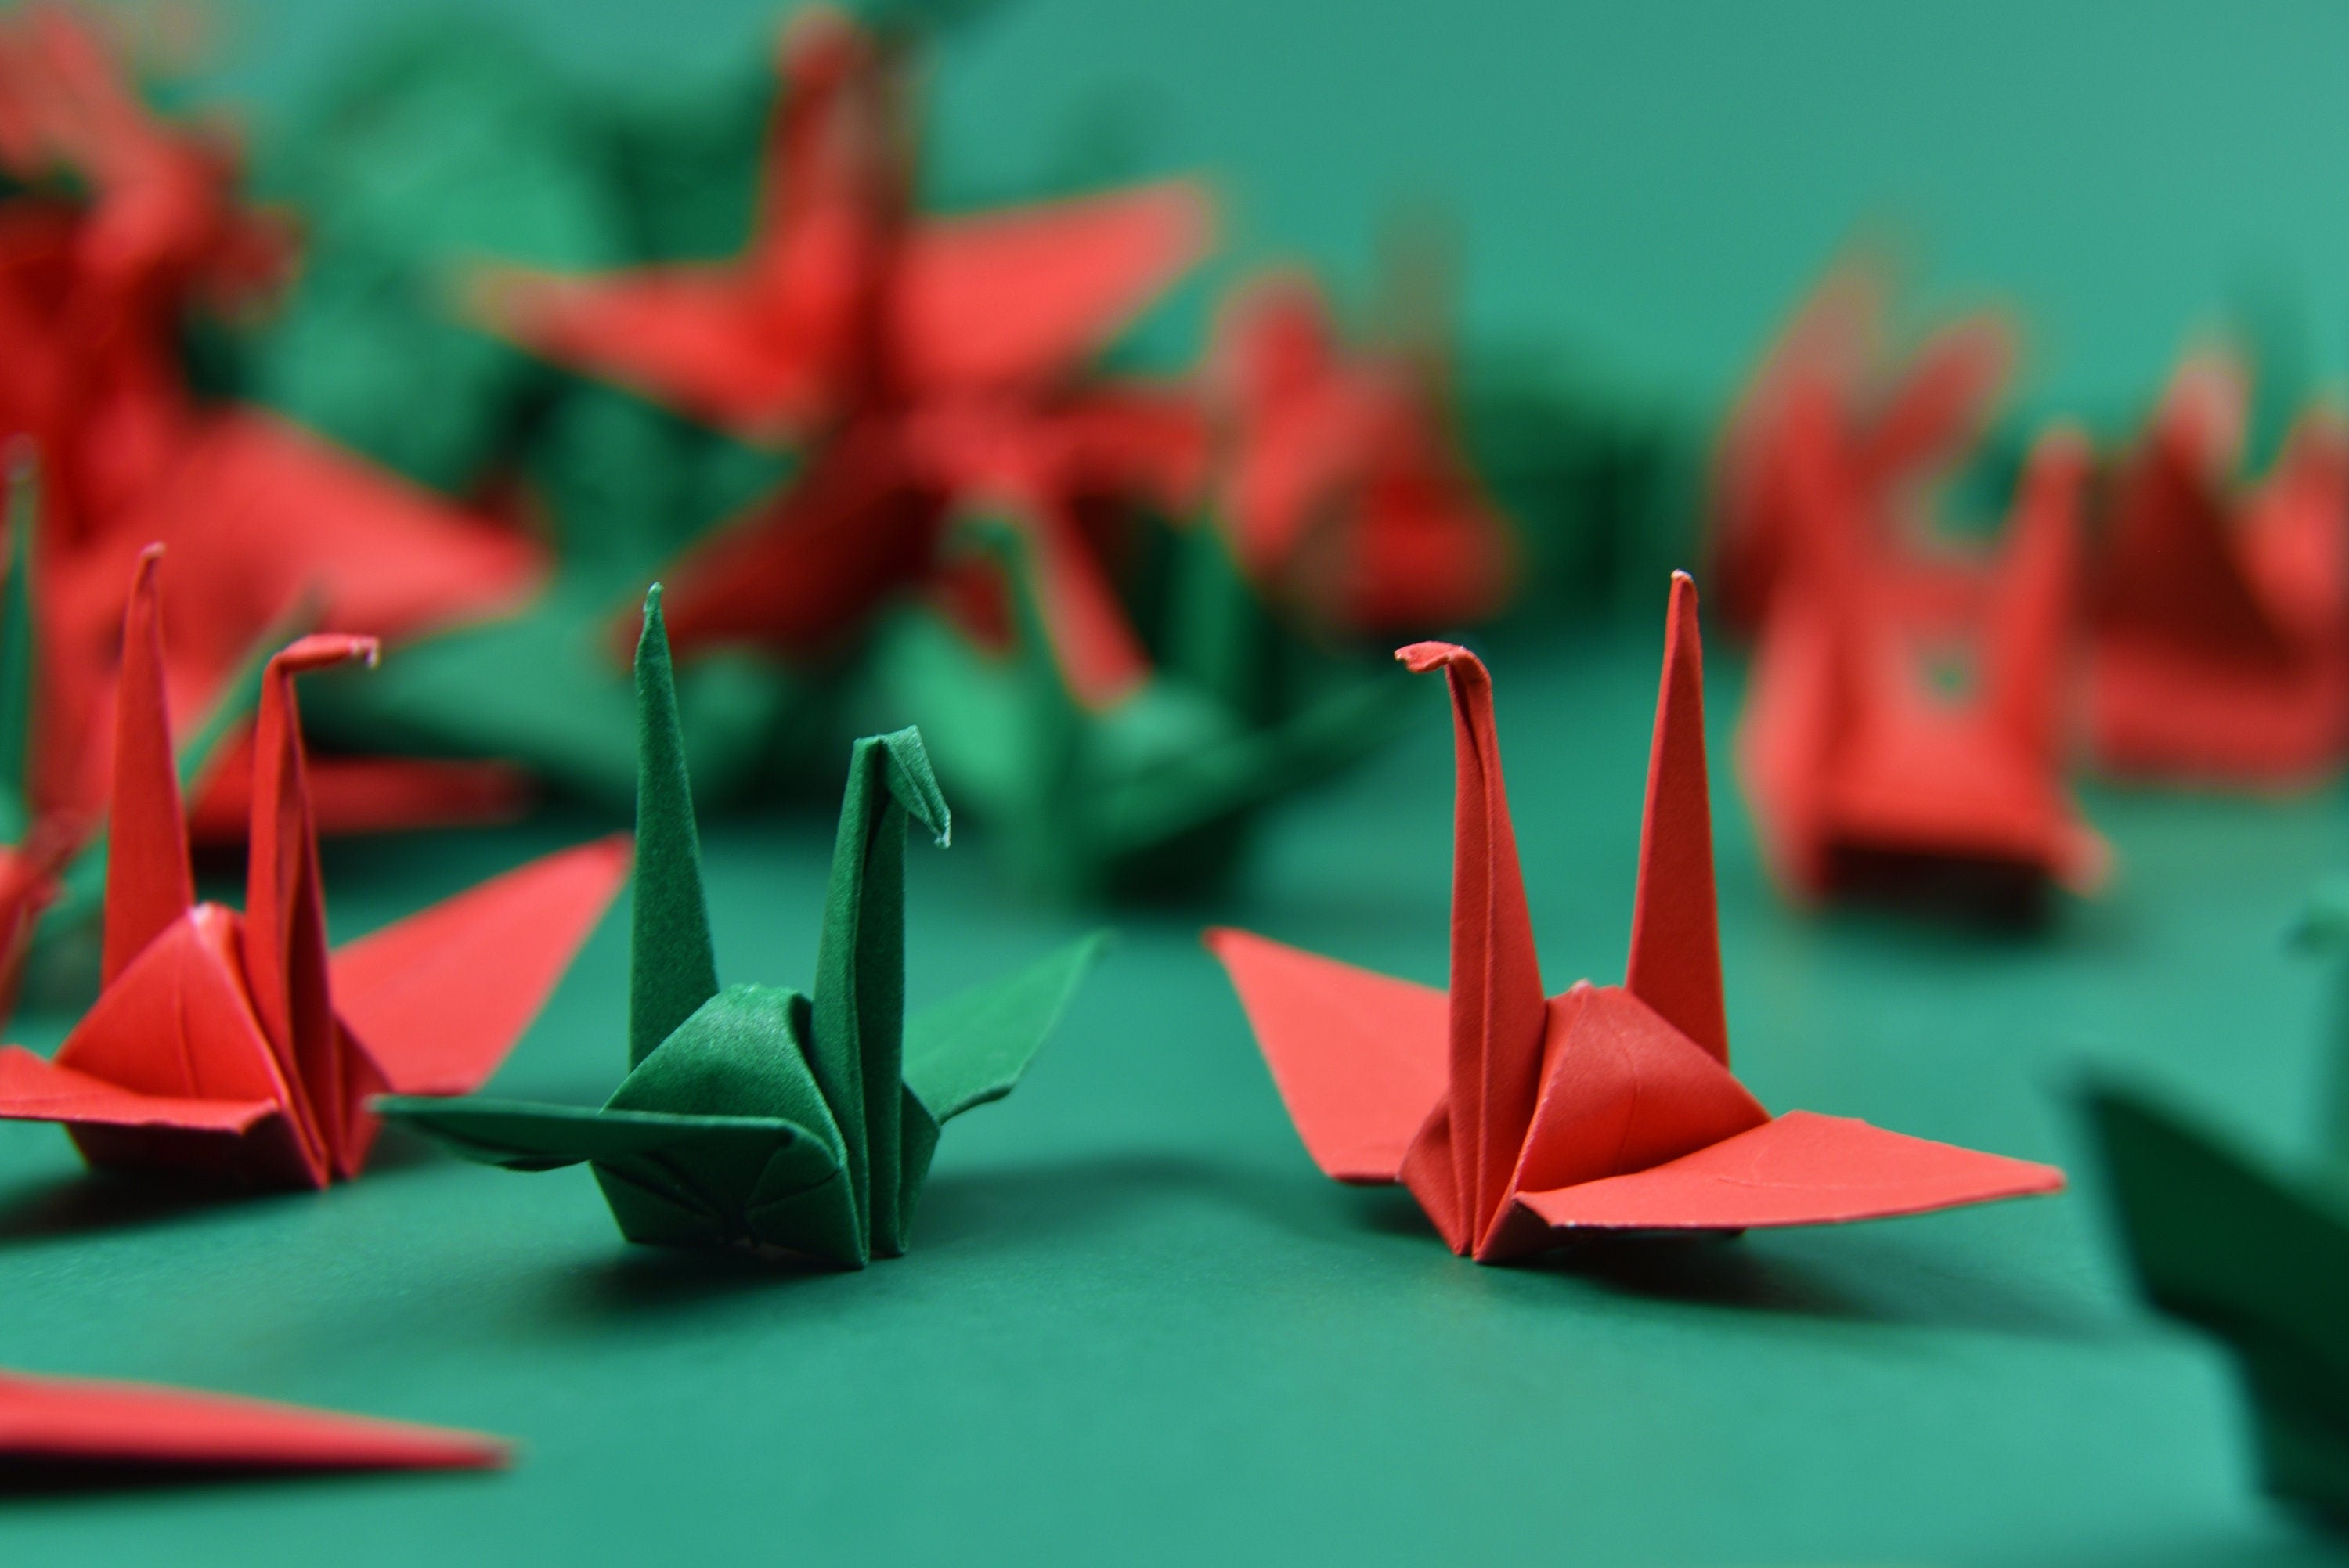 100 Christmas Origami Paper Cranes 3 inches for Wedding Decor, Anniversary Gift by OrigamiPolly